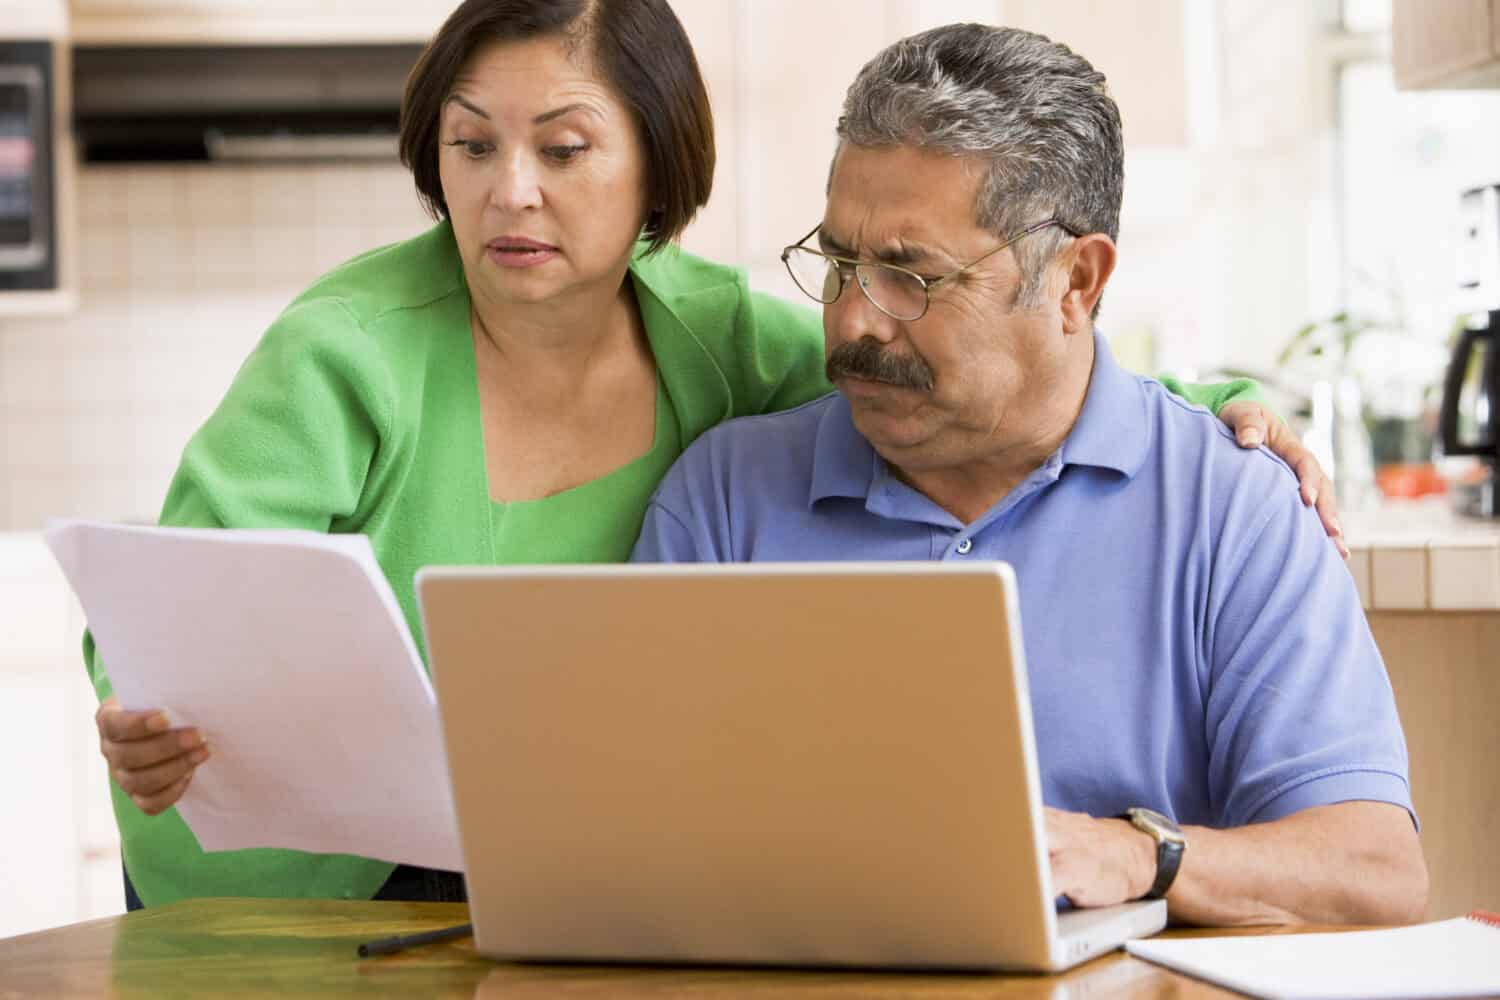 Couple in kitchen working on personal finances, looking worried